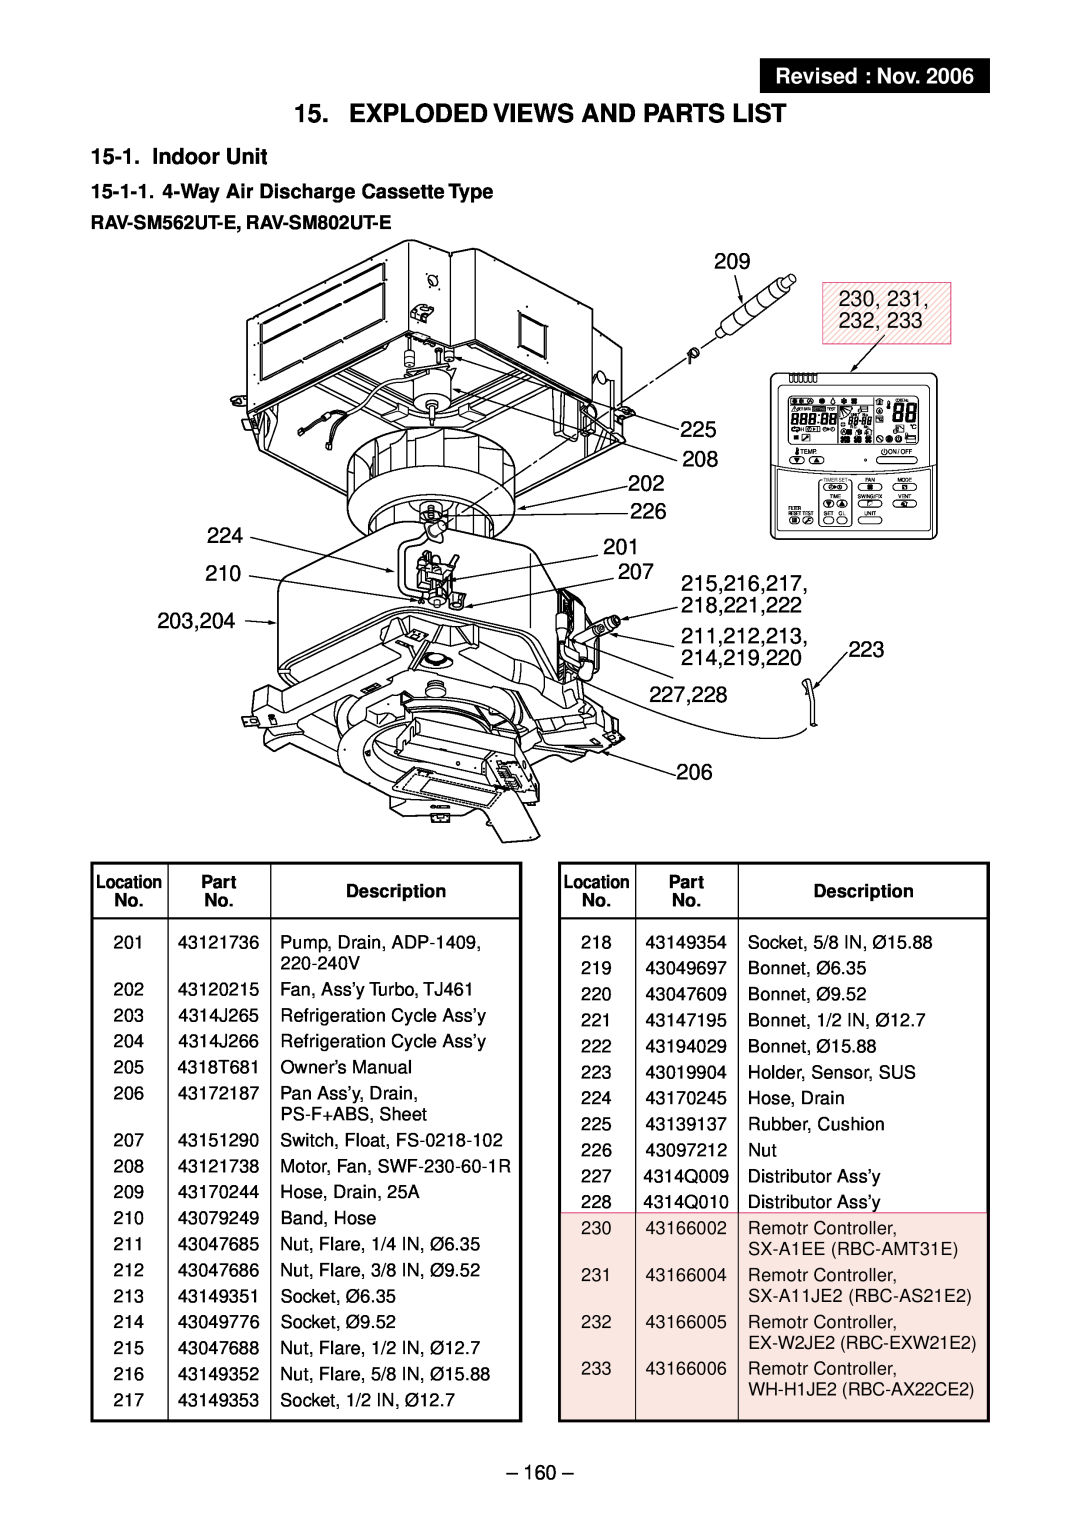 Toshiba RAV-SM1102UT-E, RAV-SM1402UT-E, RAV-SM802UT-E Exploded Views And Parts List, Revised : Nov, Indoor Unit 